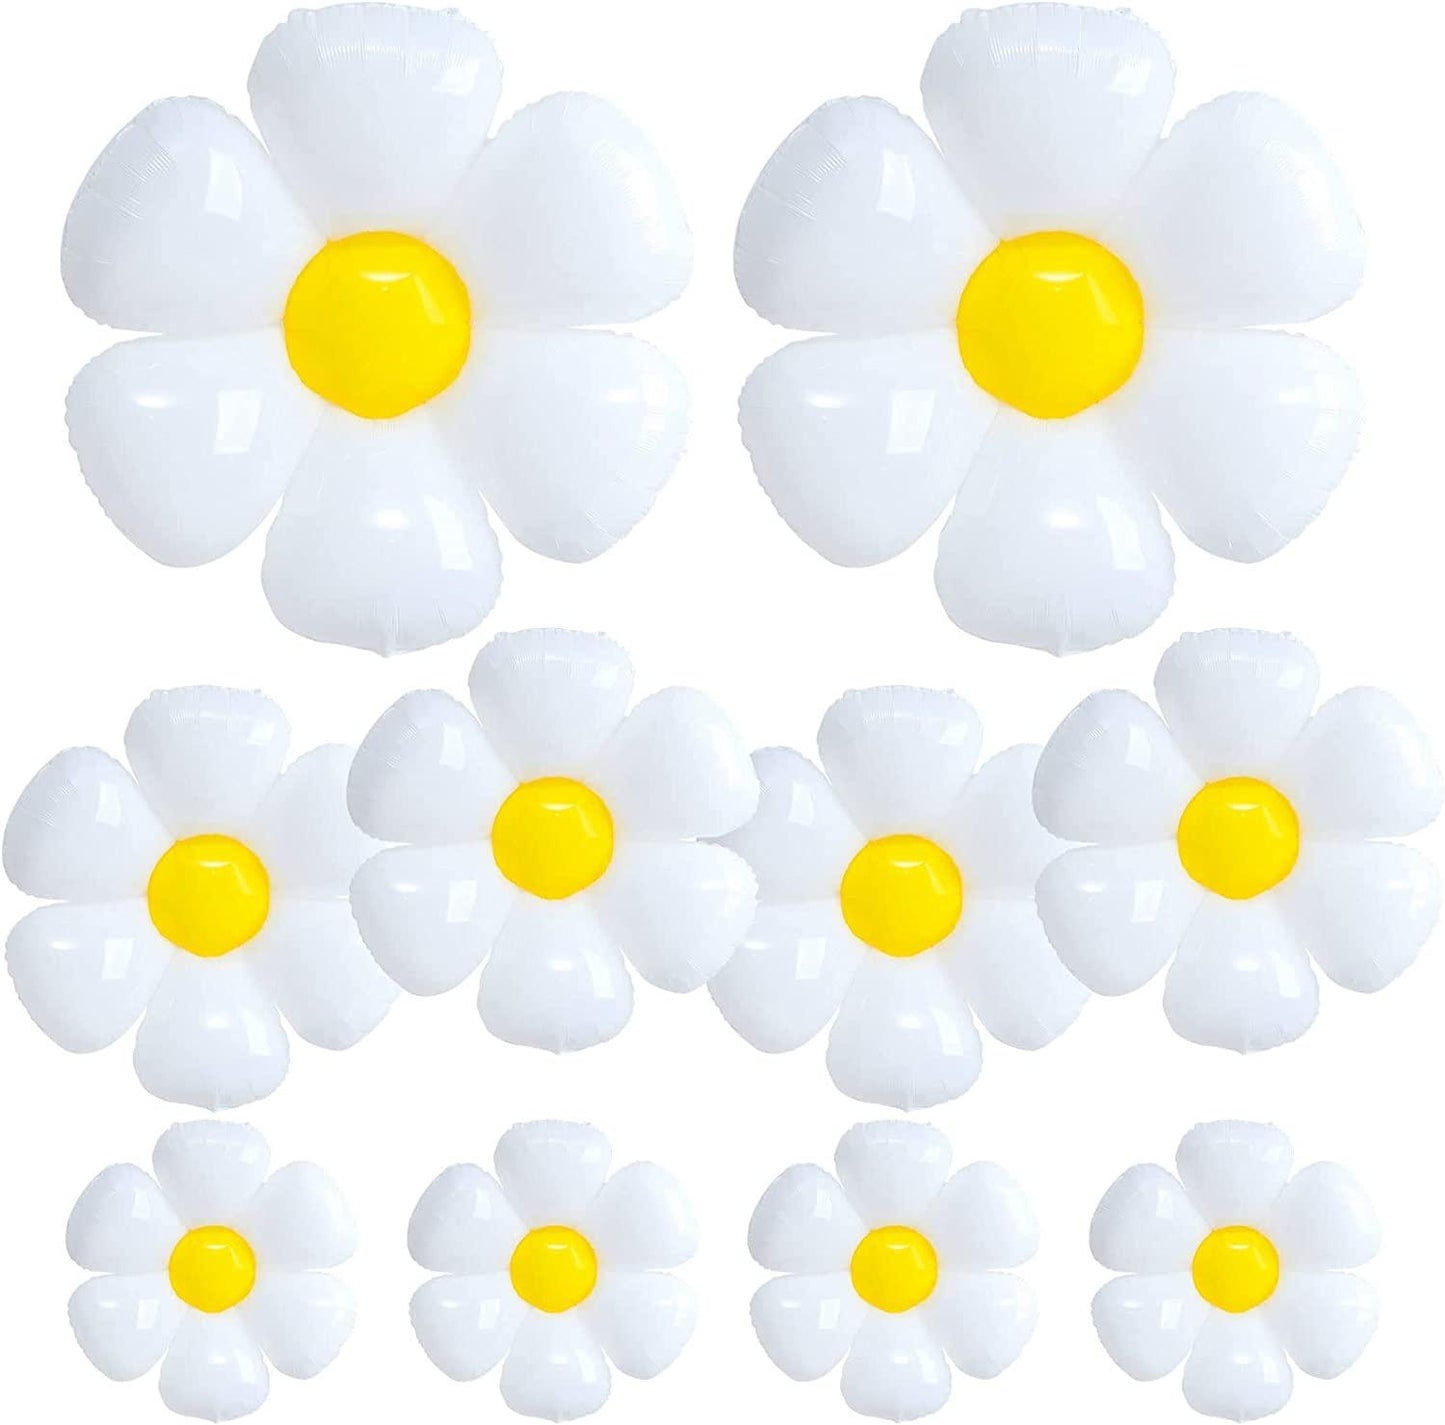 10 Pcs Daisy Balloons, Huge White Flower Aluminum Foil Balloons for Birthday, Baby Shower, Wedding, Daisy Party Decorations Supplies - If you say i do